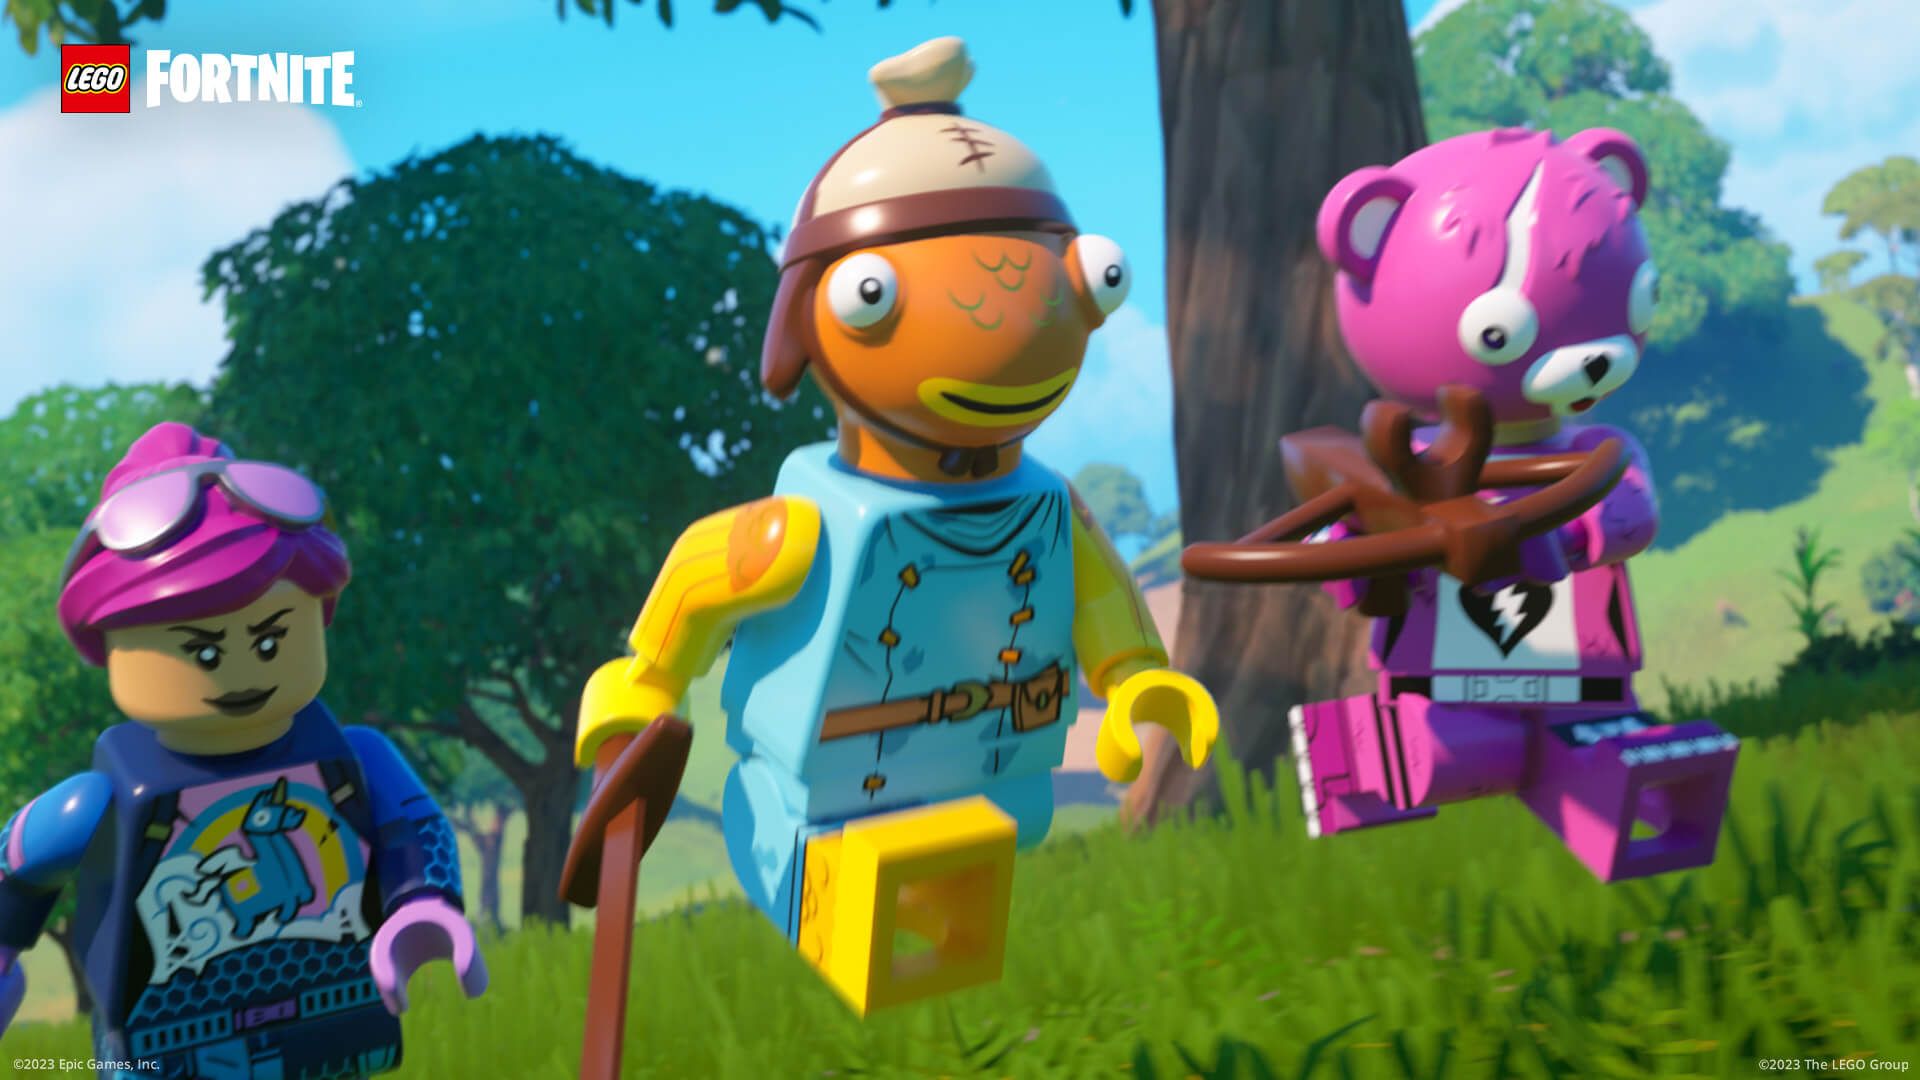 Fortnite Launches New LEGO Mode